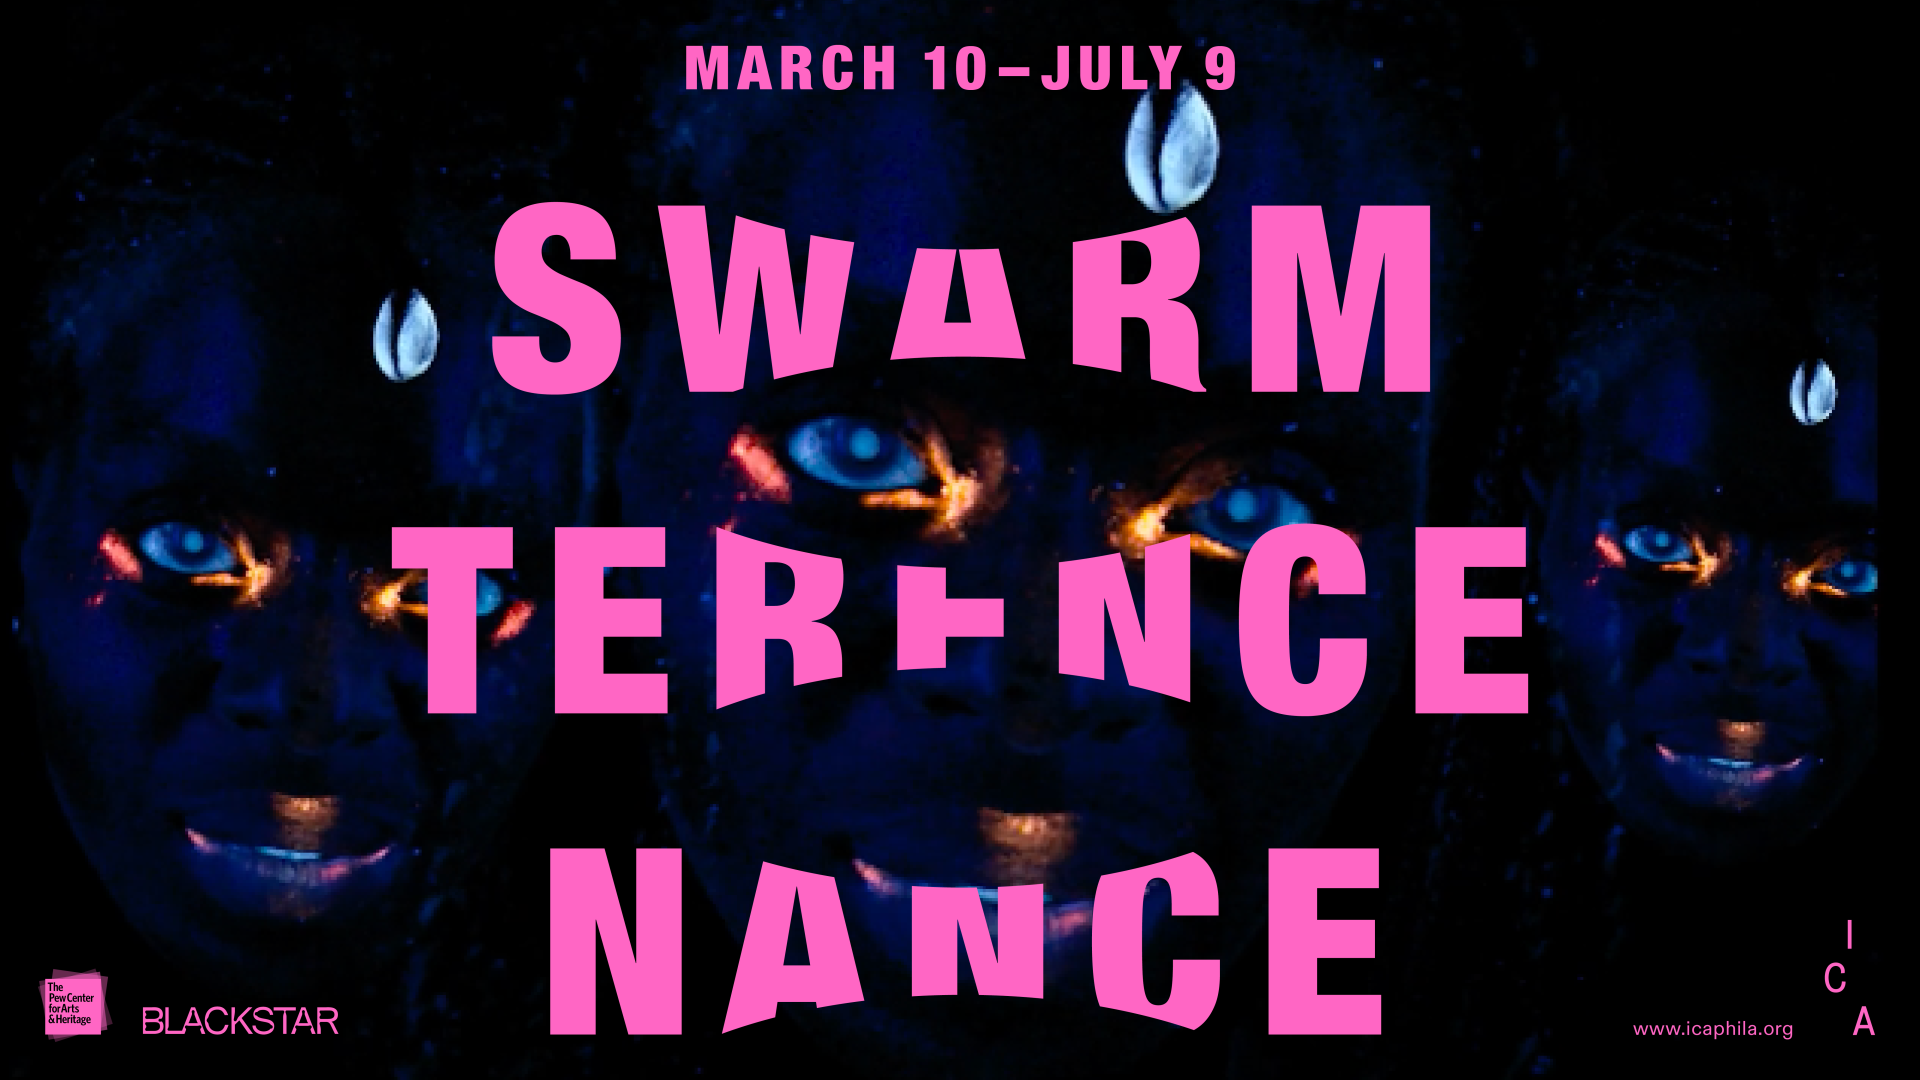 March 10 - July 9, Swarm Terence Nance, written in pink above a still image of obscured faces.